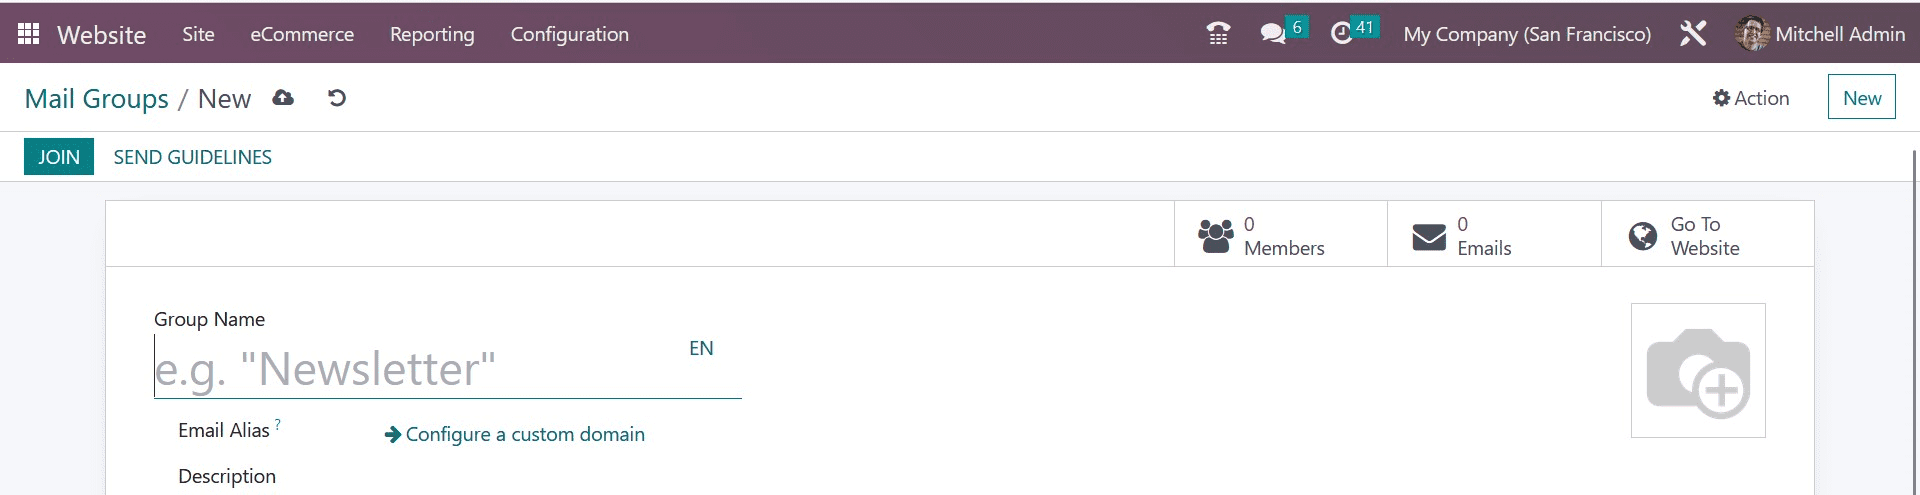 How to Manage Mailing Lists in Odoo 16 Website App